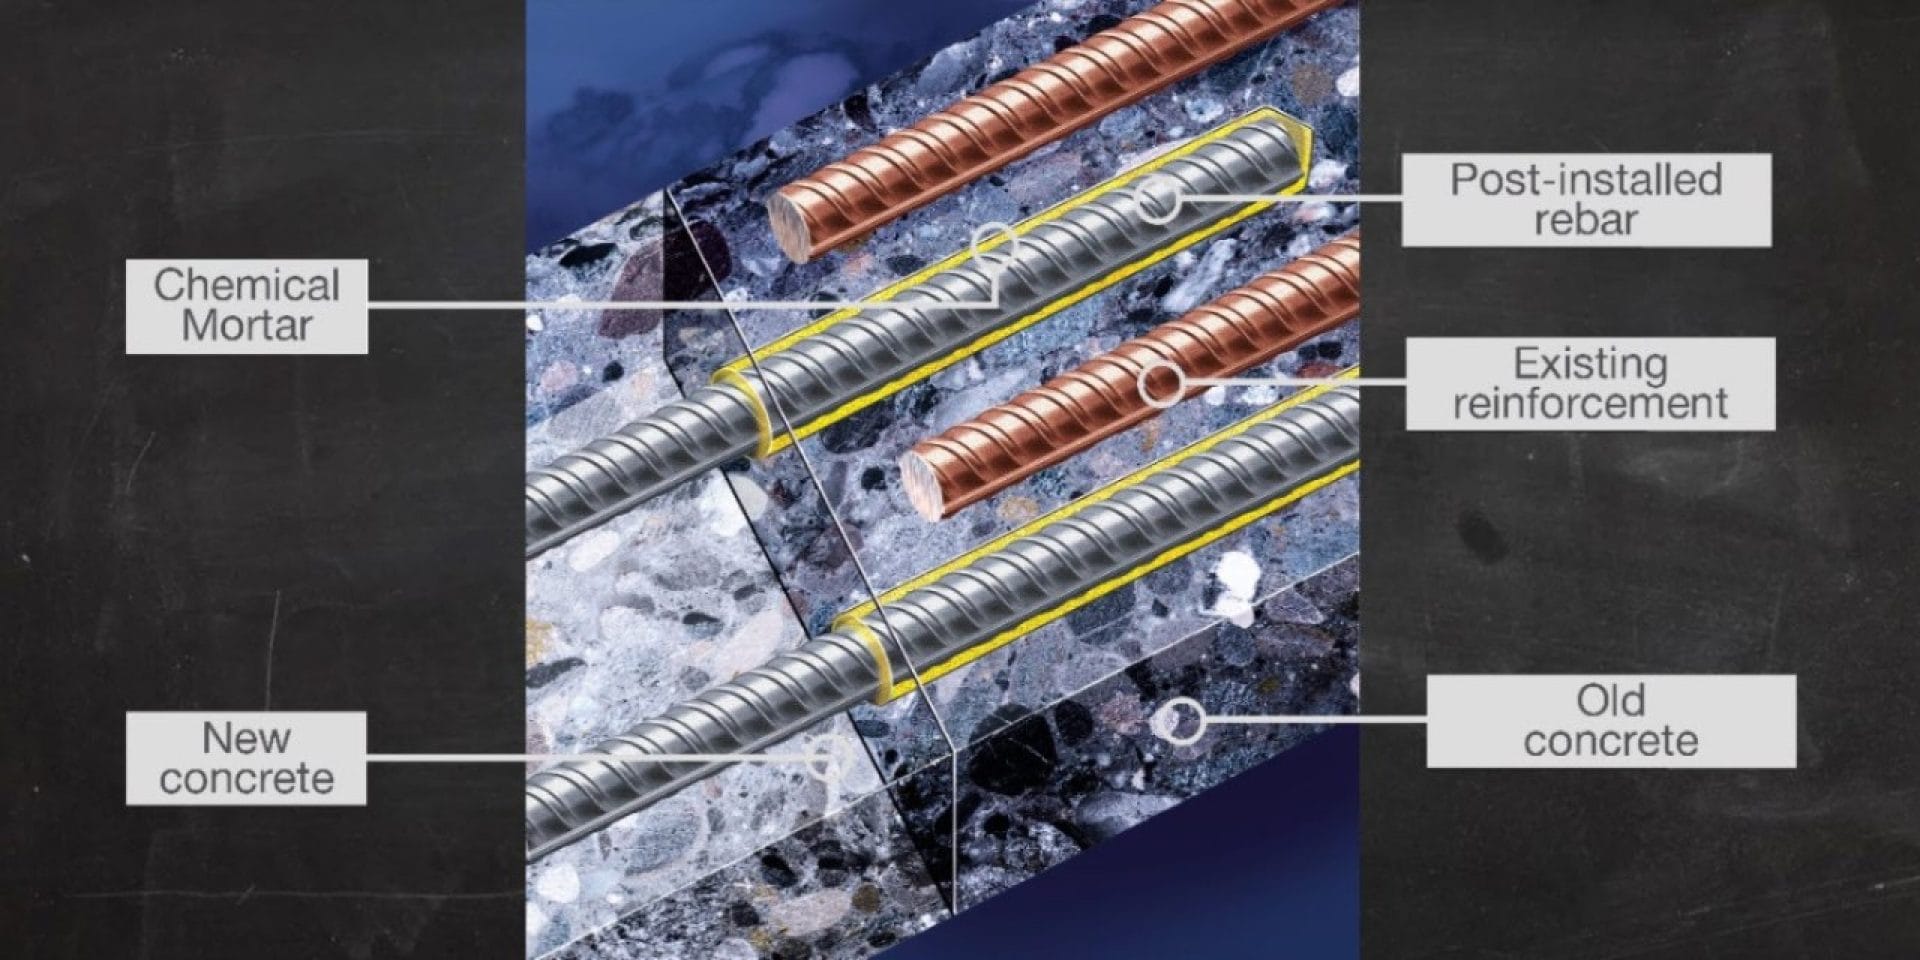 Image showing how post-installed rebar is to extent, strengthen or add new components to existing structures.